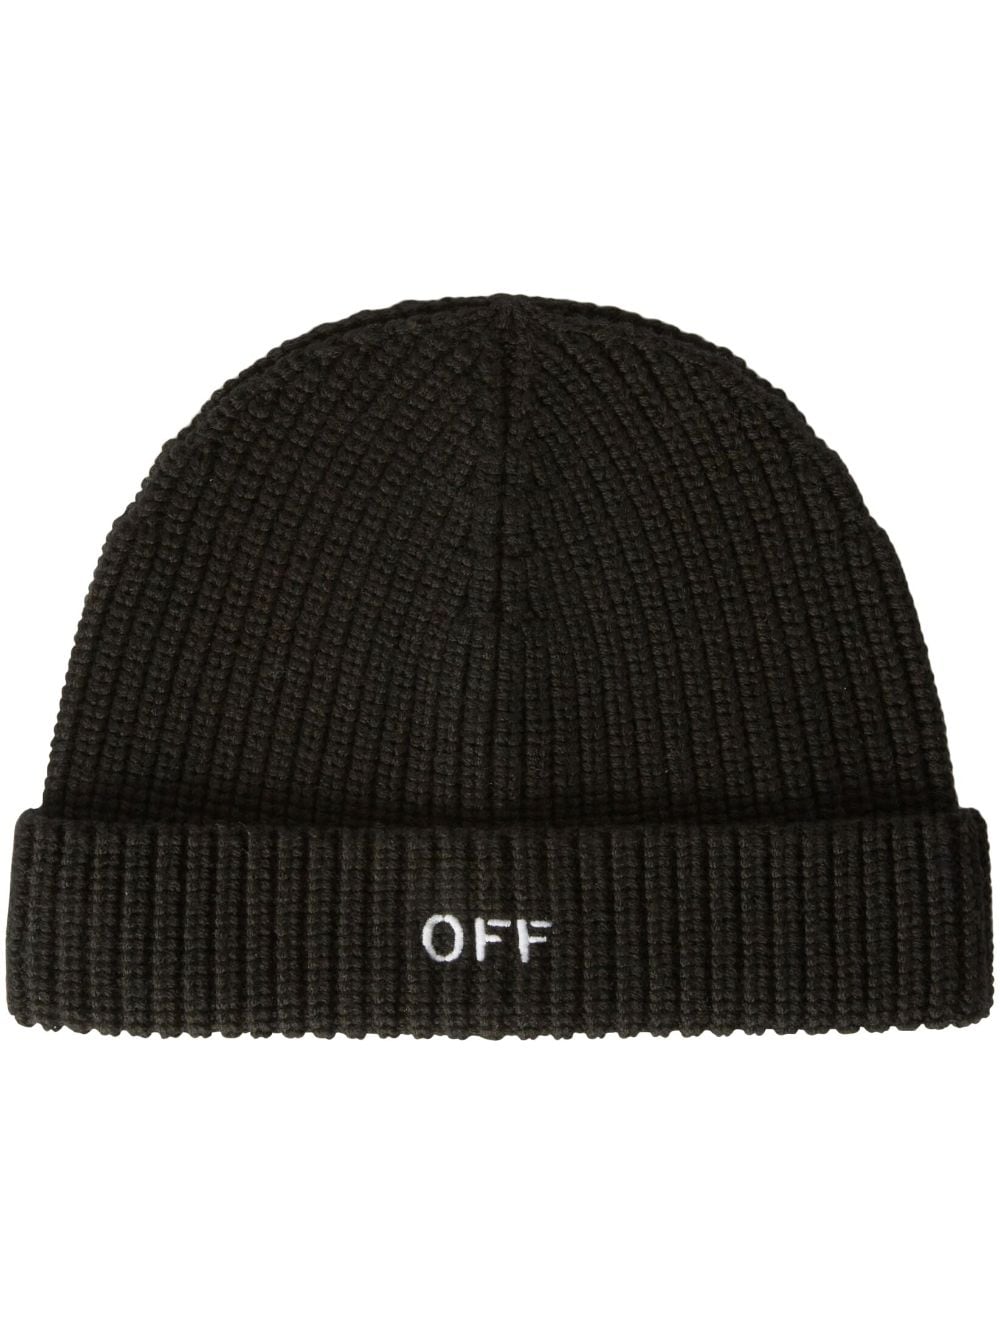 Off-White embroidered ribbed-knit beanie - Black von Off-White